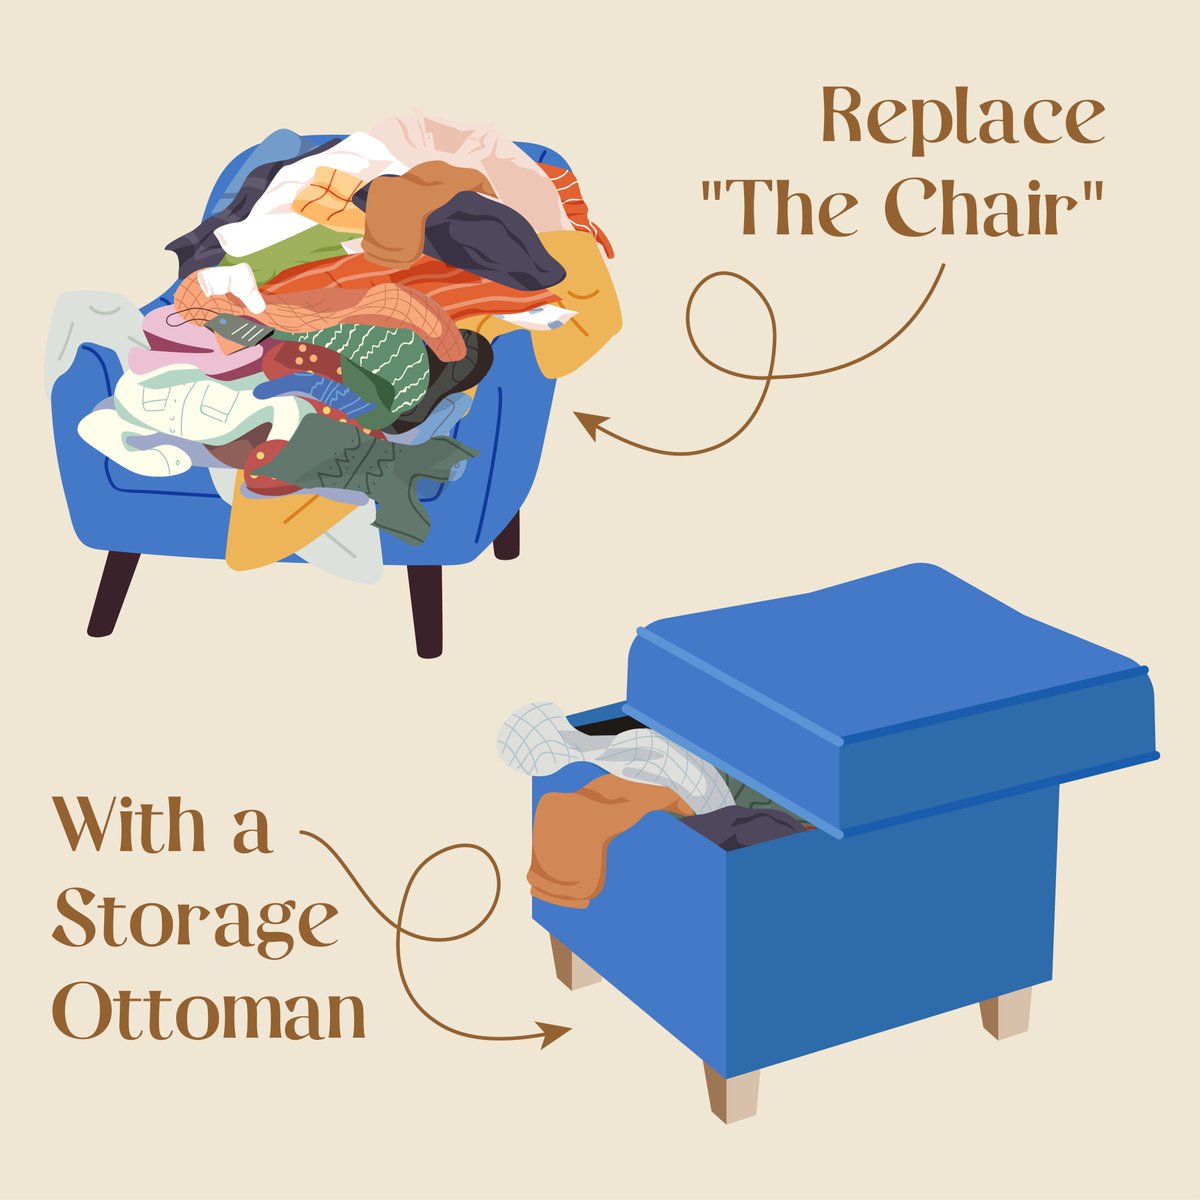 Got a chair that serves as a house catch-all? Try a storage ottoman instead. #HomeTips
Bill & Sophie Howell, #househunting, #newhome, #realtor, #realestate, #properties, #investmentproperty, #wanttomove, #dreamhome, #sellingproperty, #motherinlawsuite, #loghomes, #views,